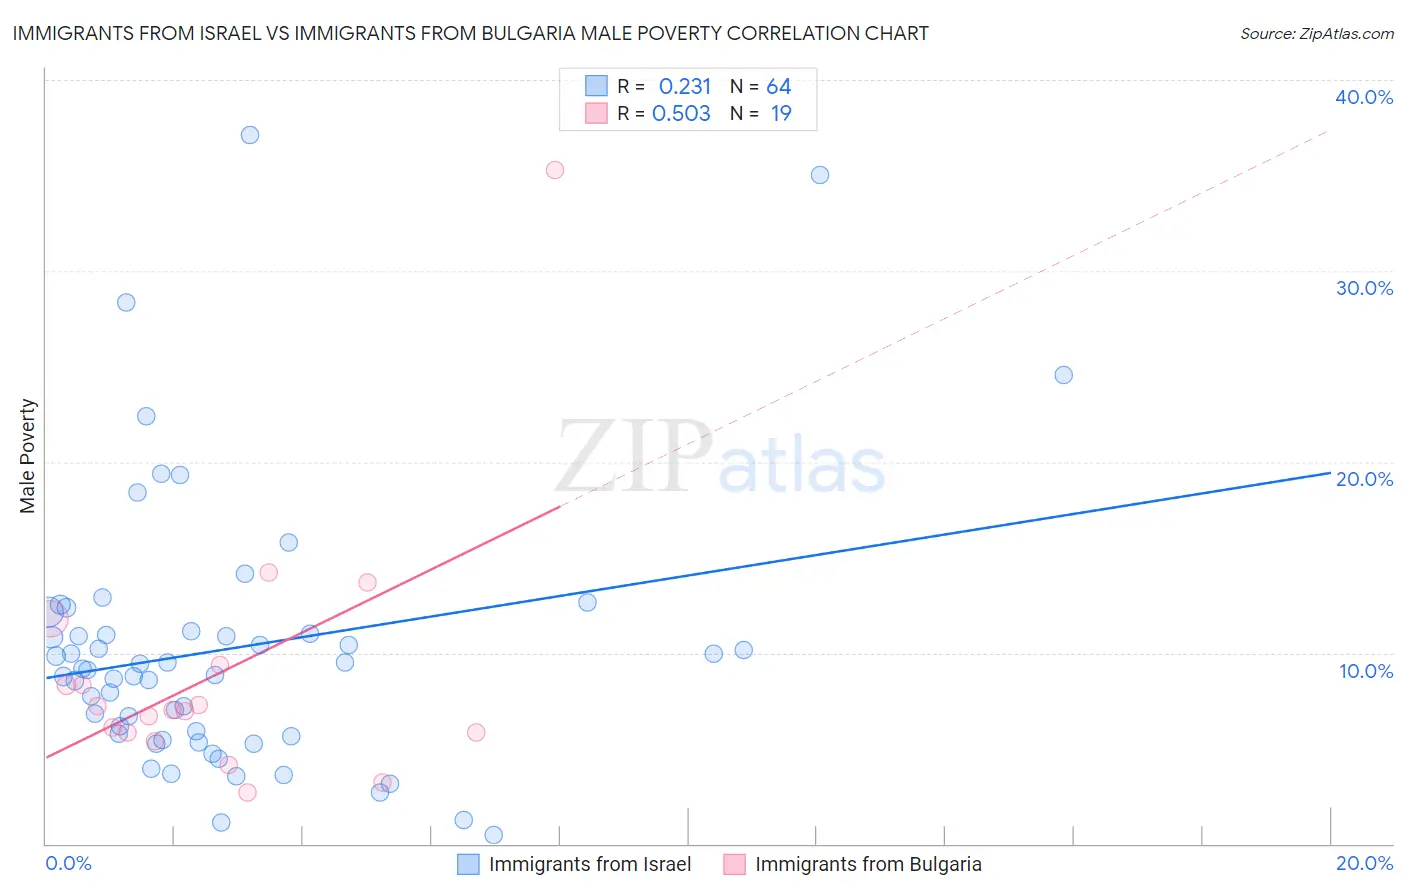 Immigrants from Israel vs Immigrants from Bulgaria Male Poverty